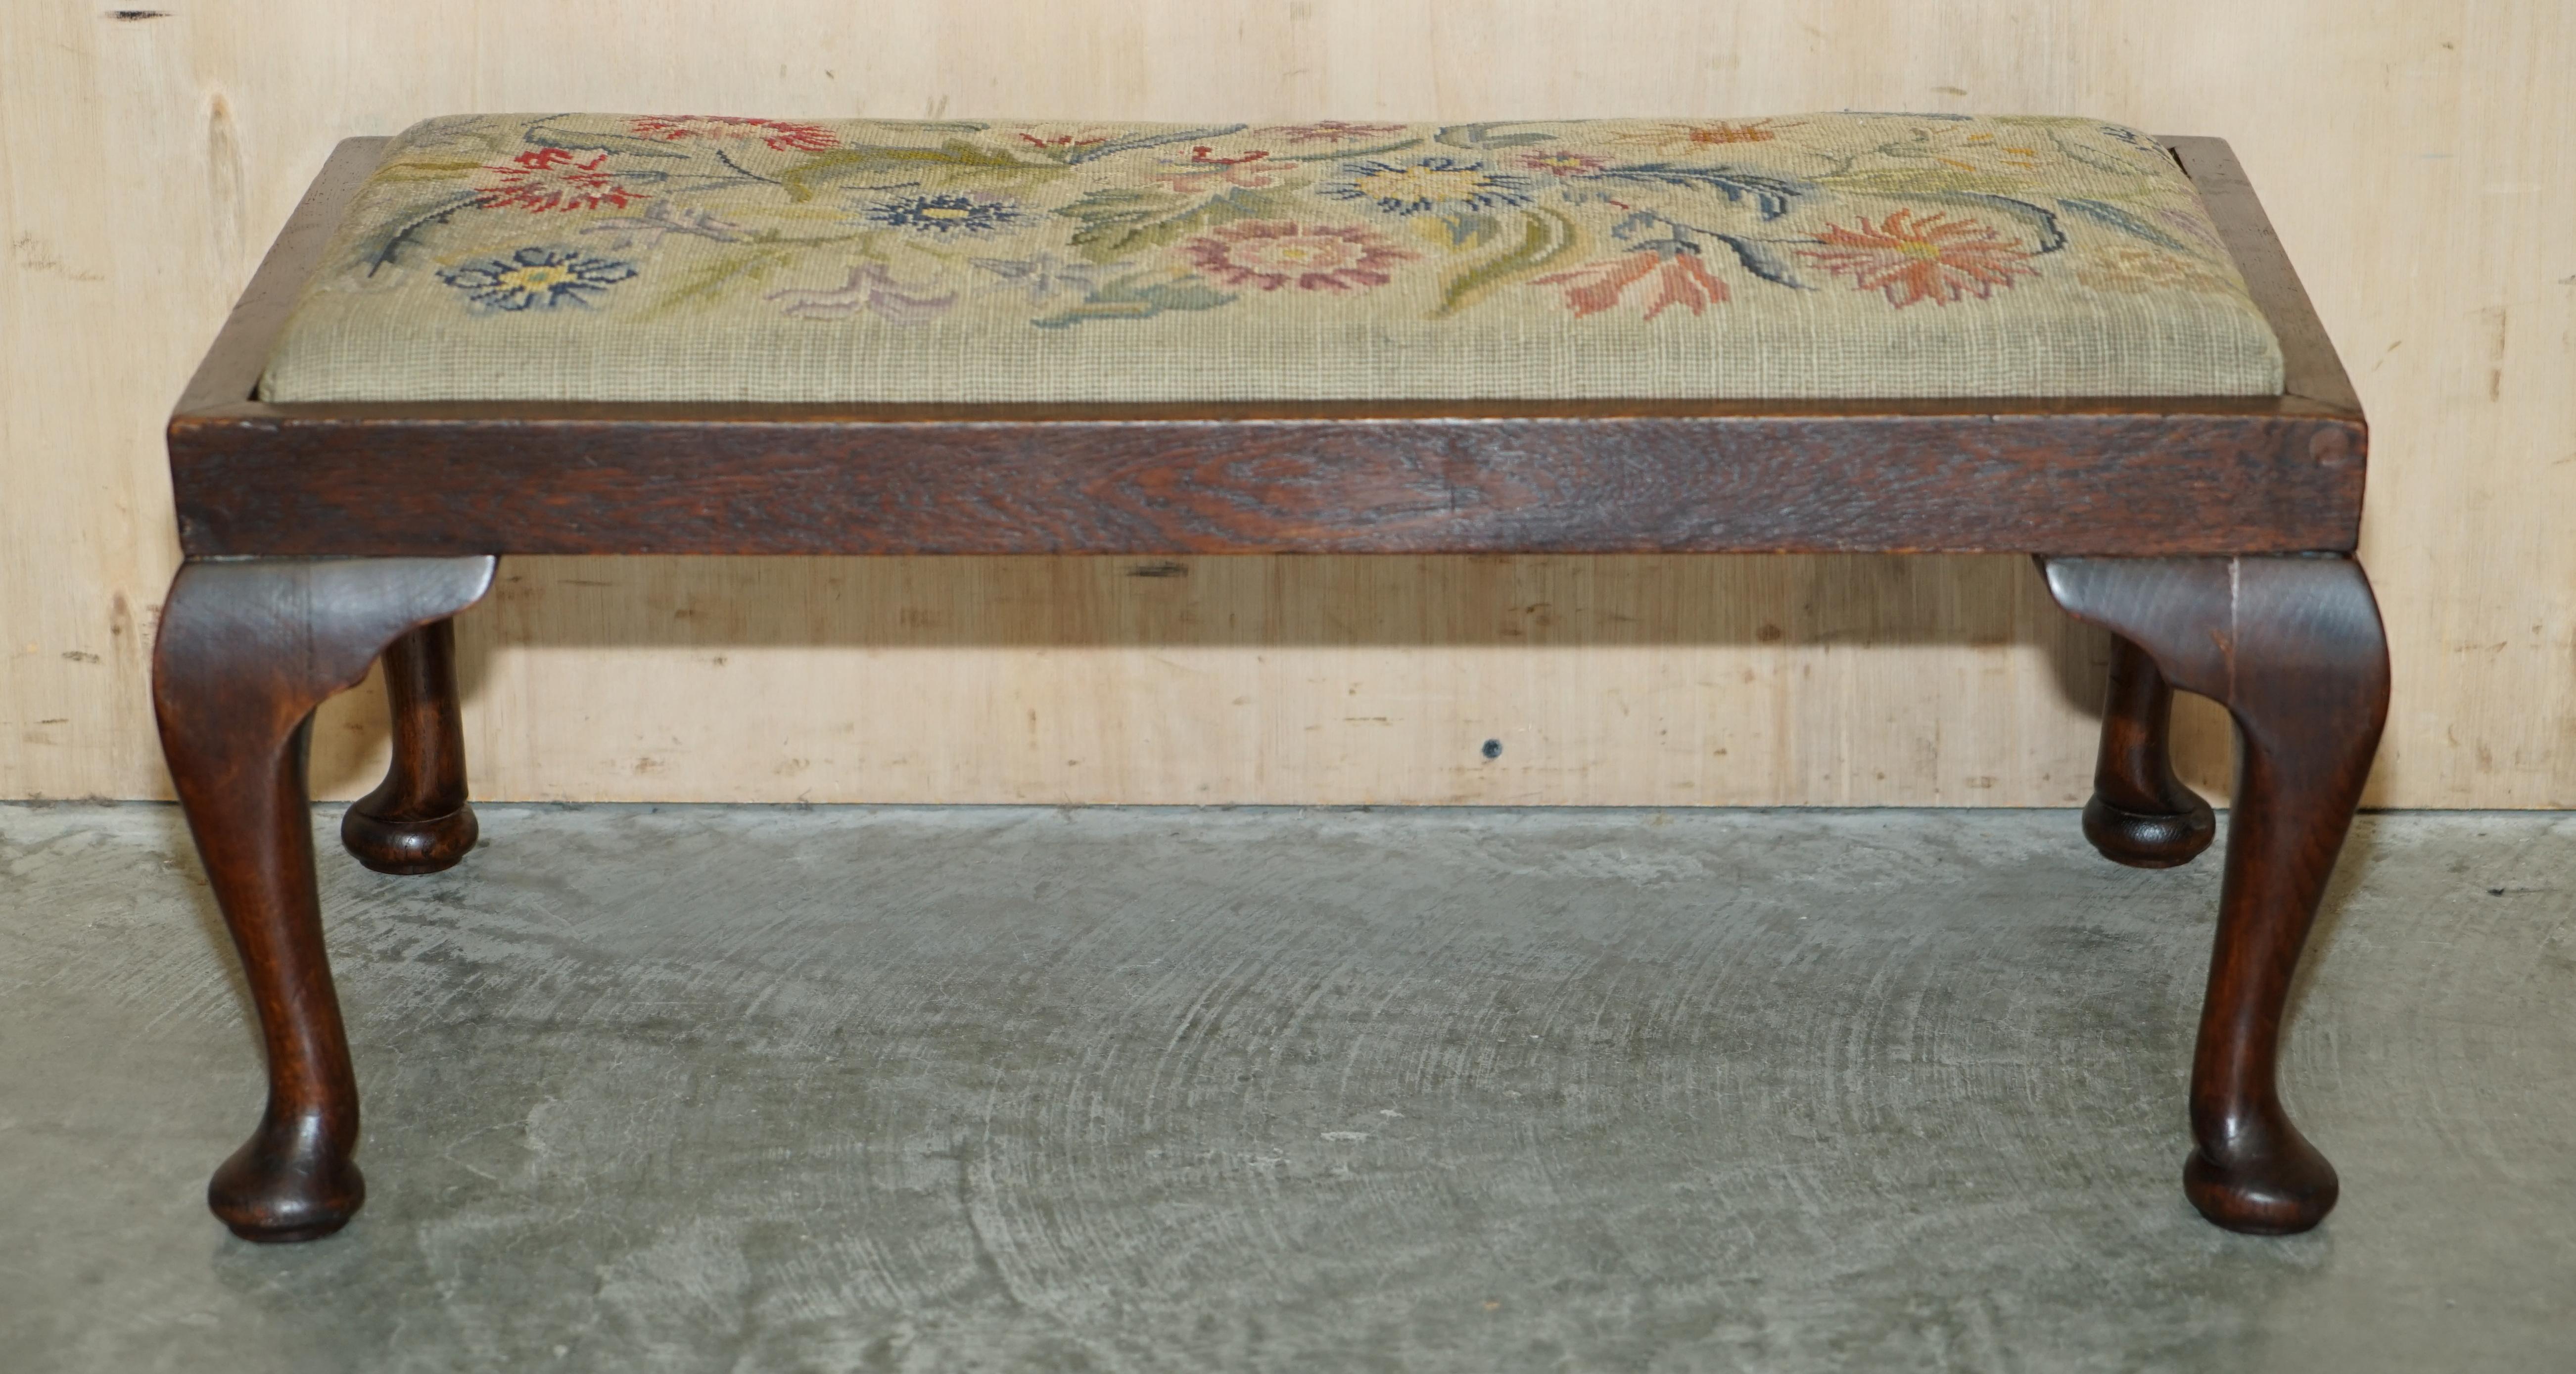 Antique Edwardian Walnut Cabriole Legged Footstool Embroidered Upholstery For Sale 10